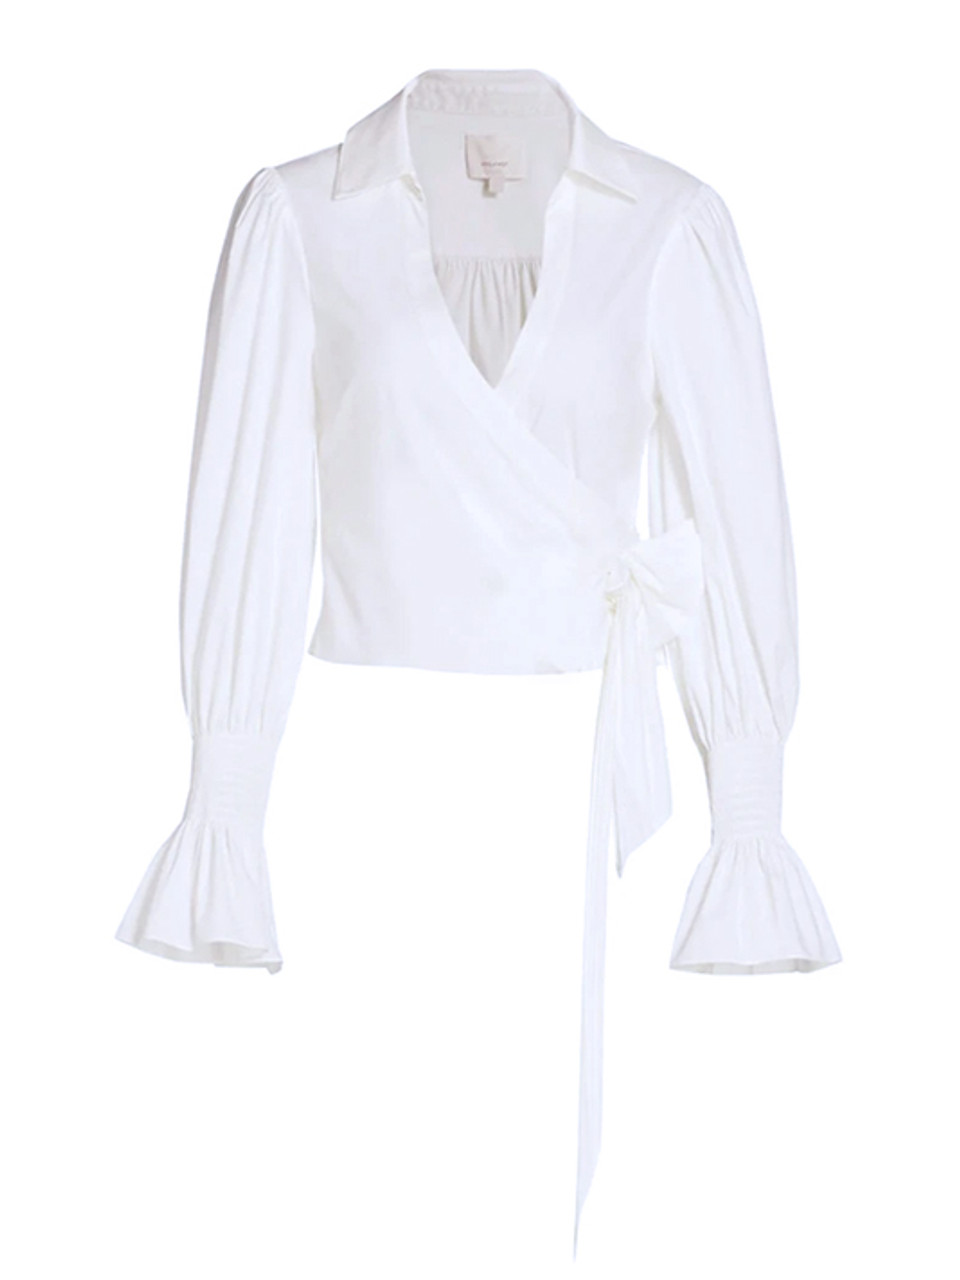 CINQ A SEPT Alessandra Top in White